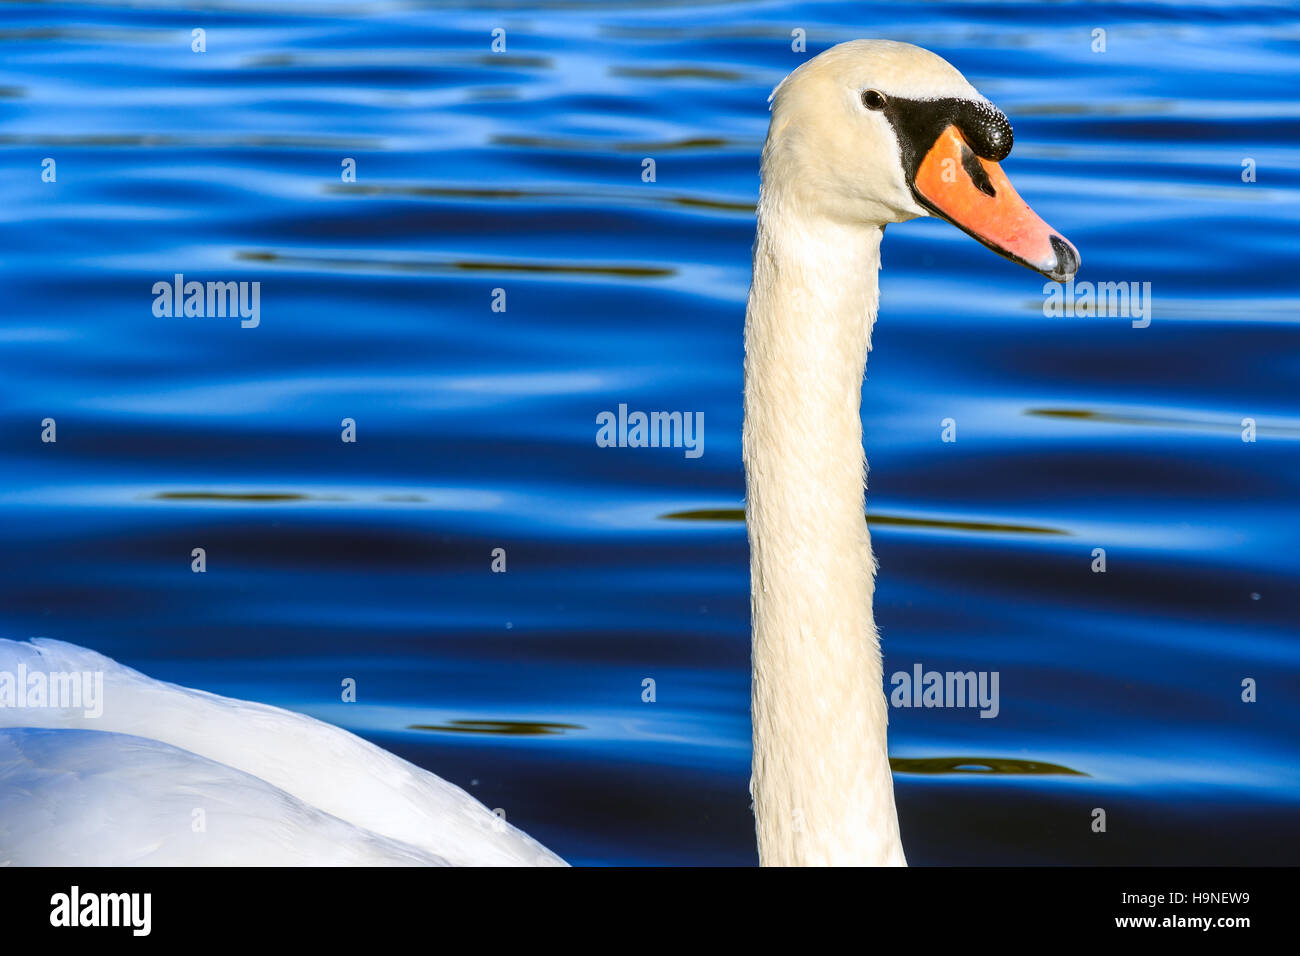 Swan swimming in the Serpentine lake in Hyde Park, London Stock Photo